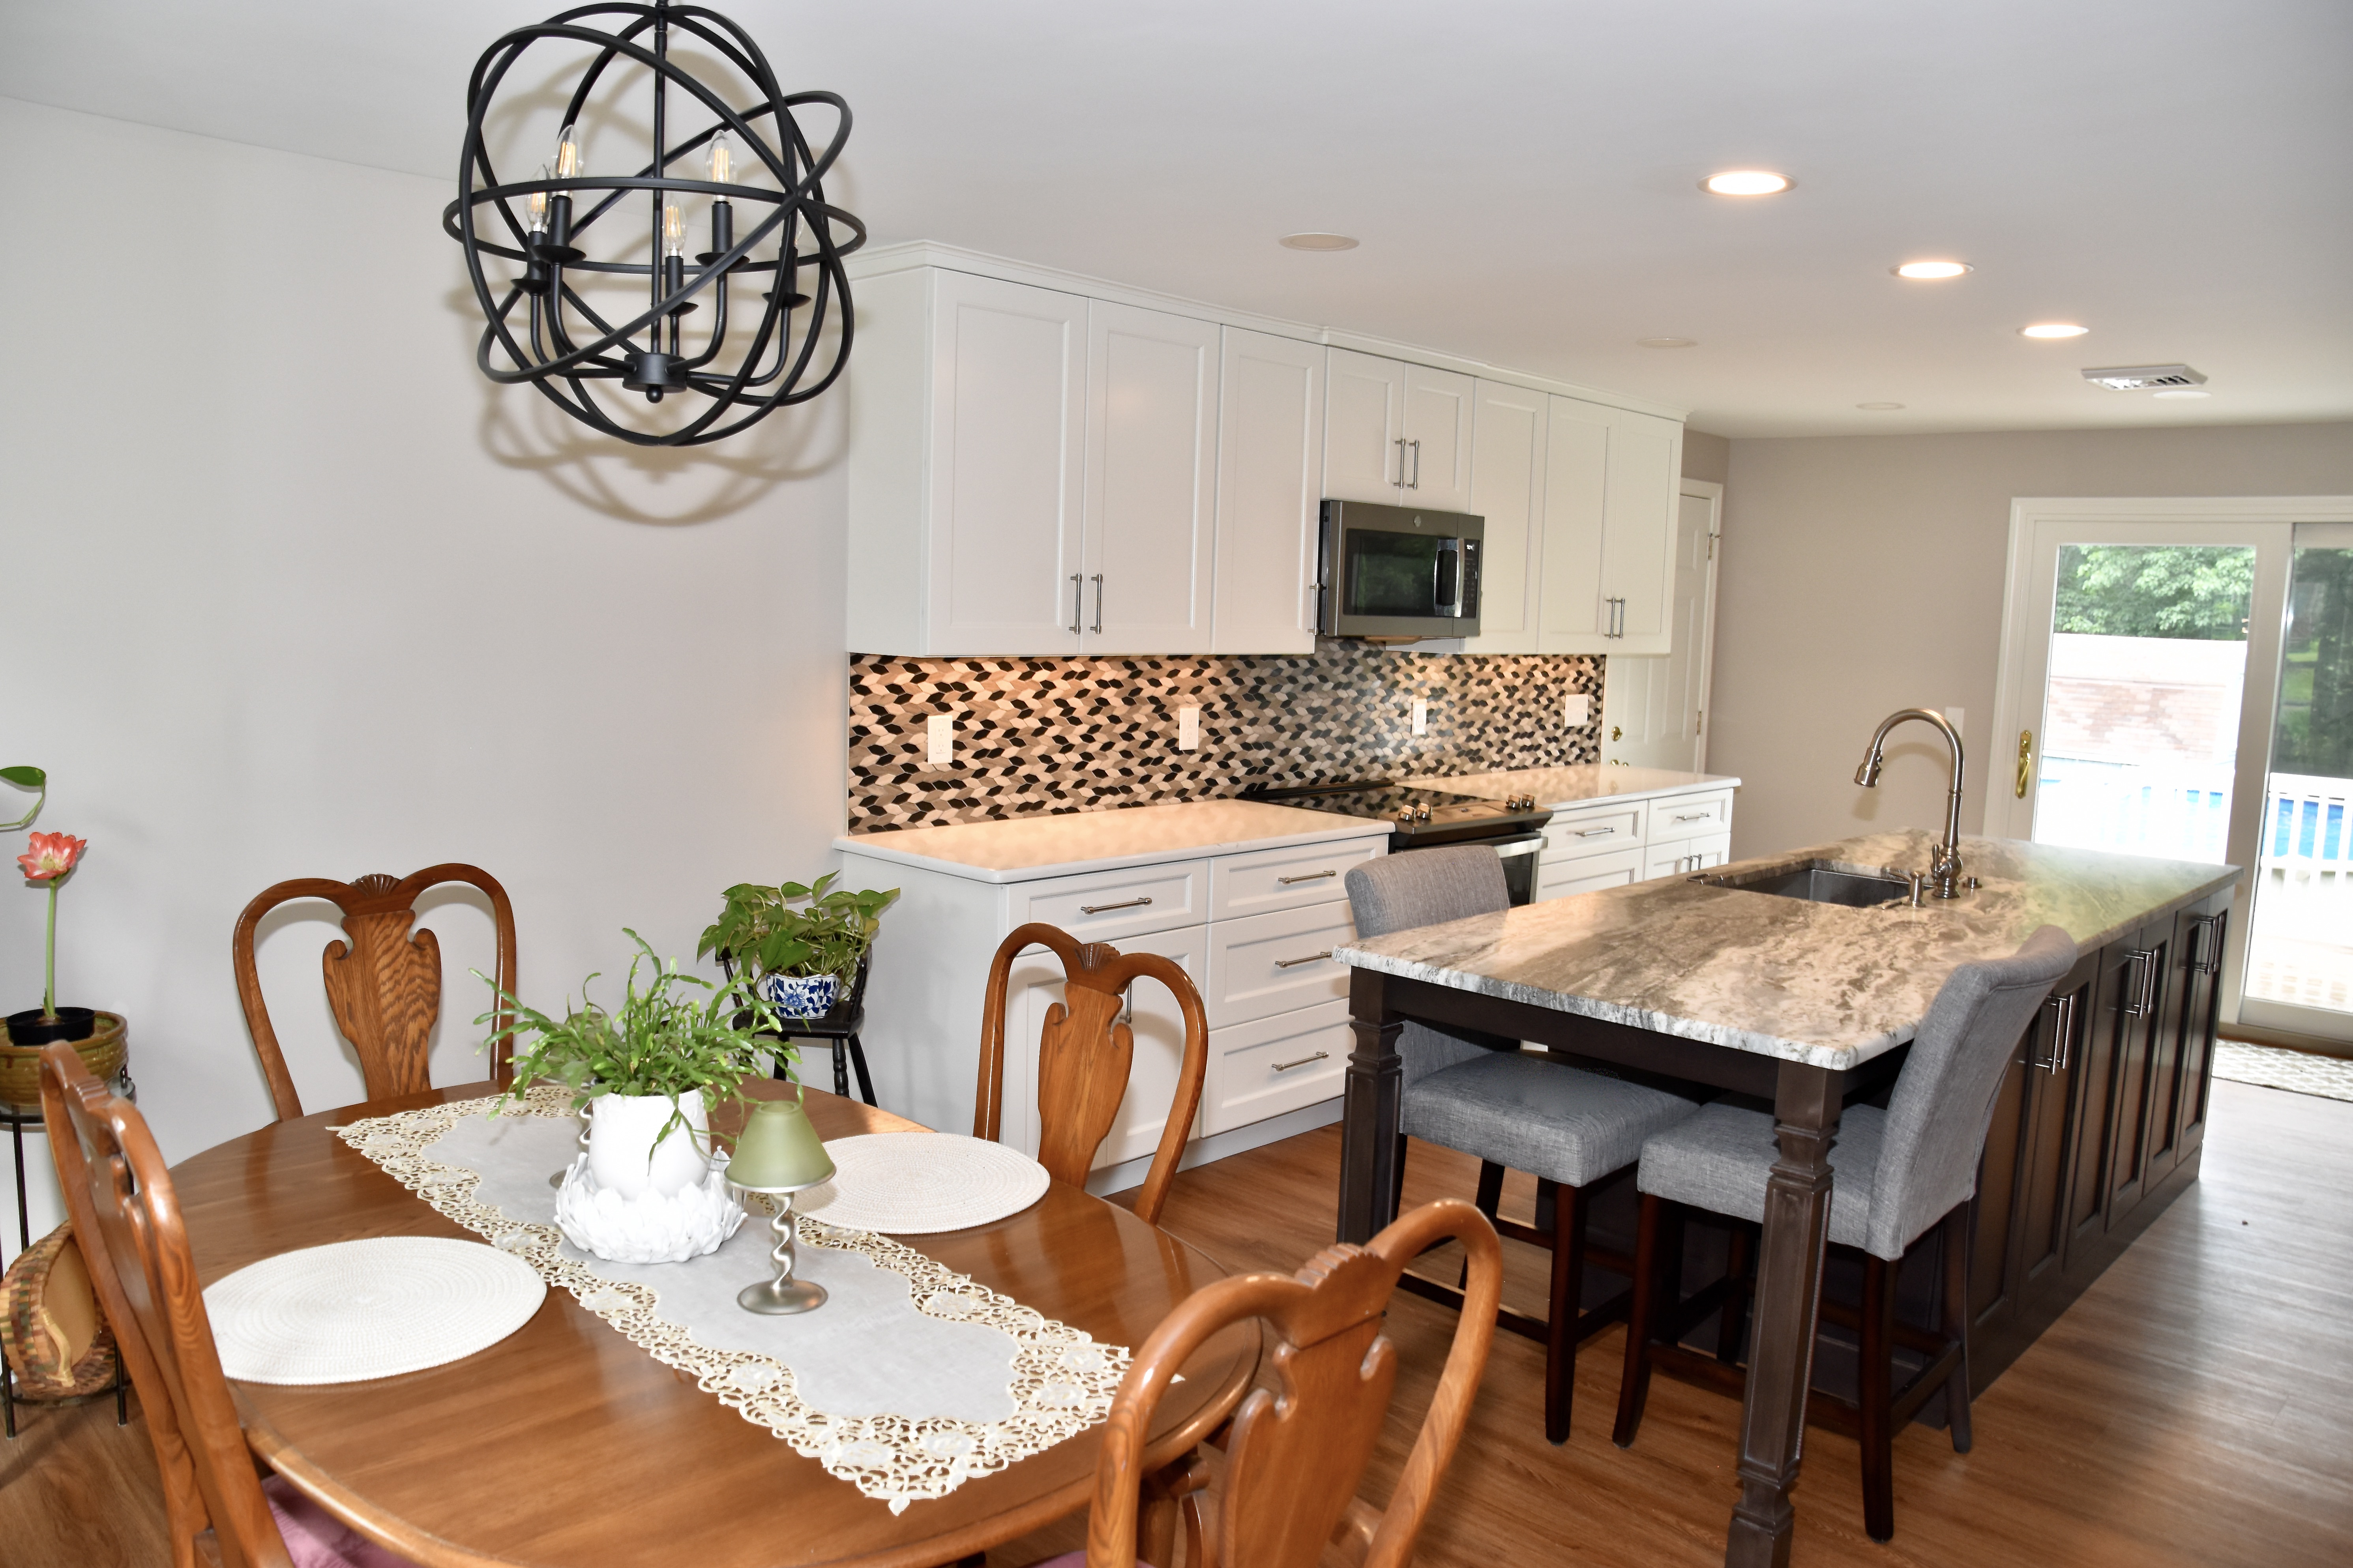 Kitchen and Dining Room Remodel in Wallingford, CT 1